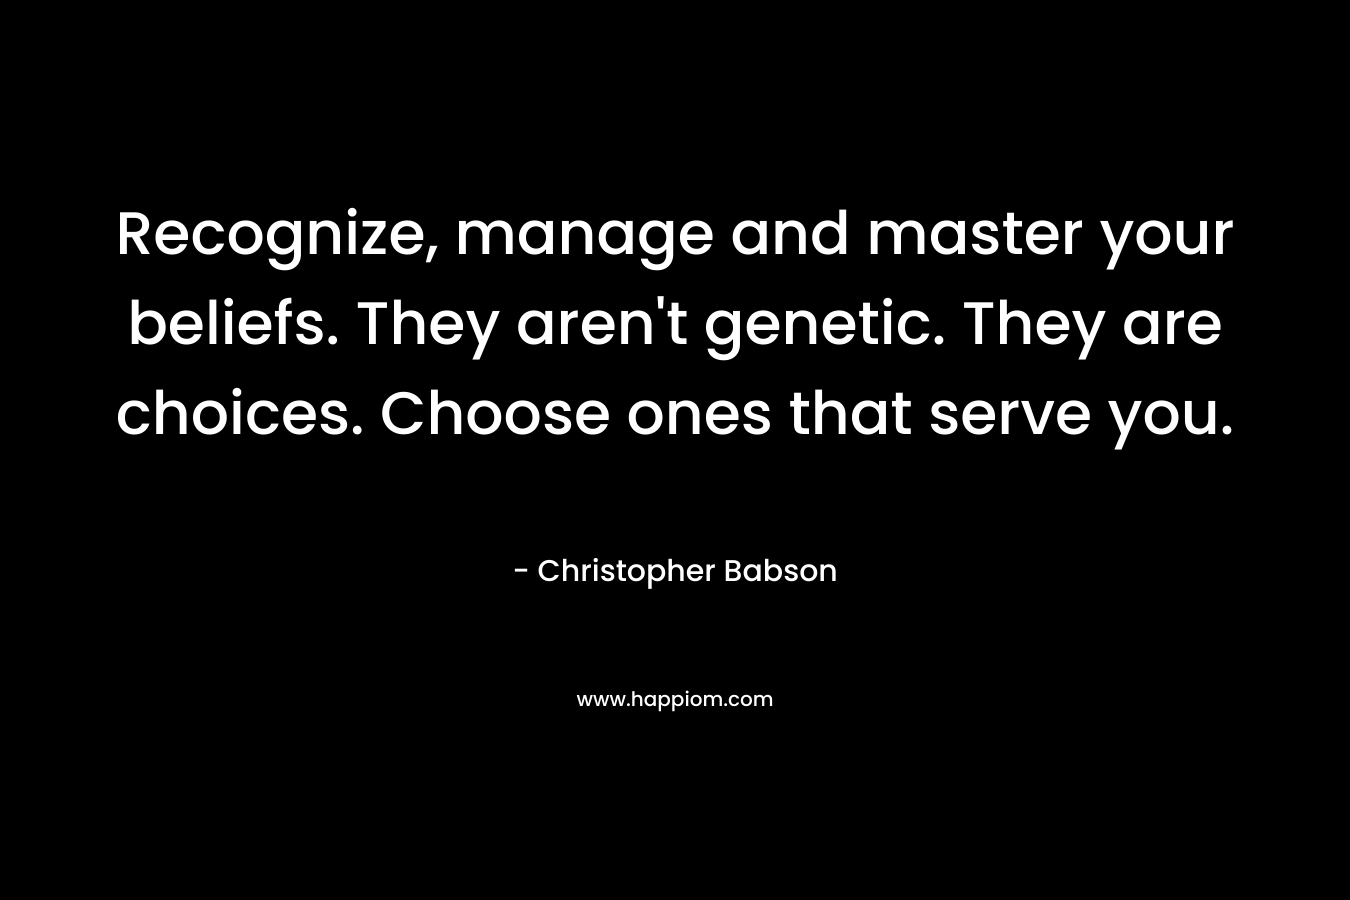 Recognize, manage and master your beliefs. They aren't genetic. They are choices. Choose ones that serve you.